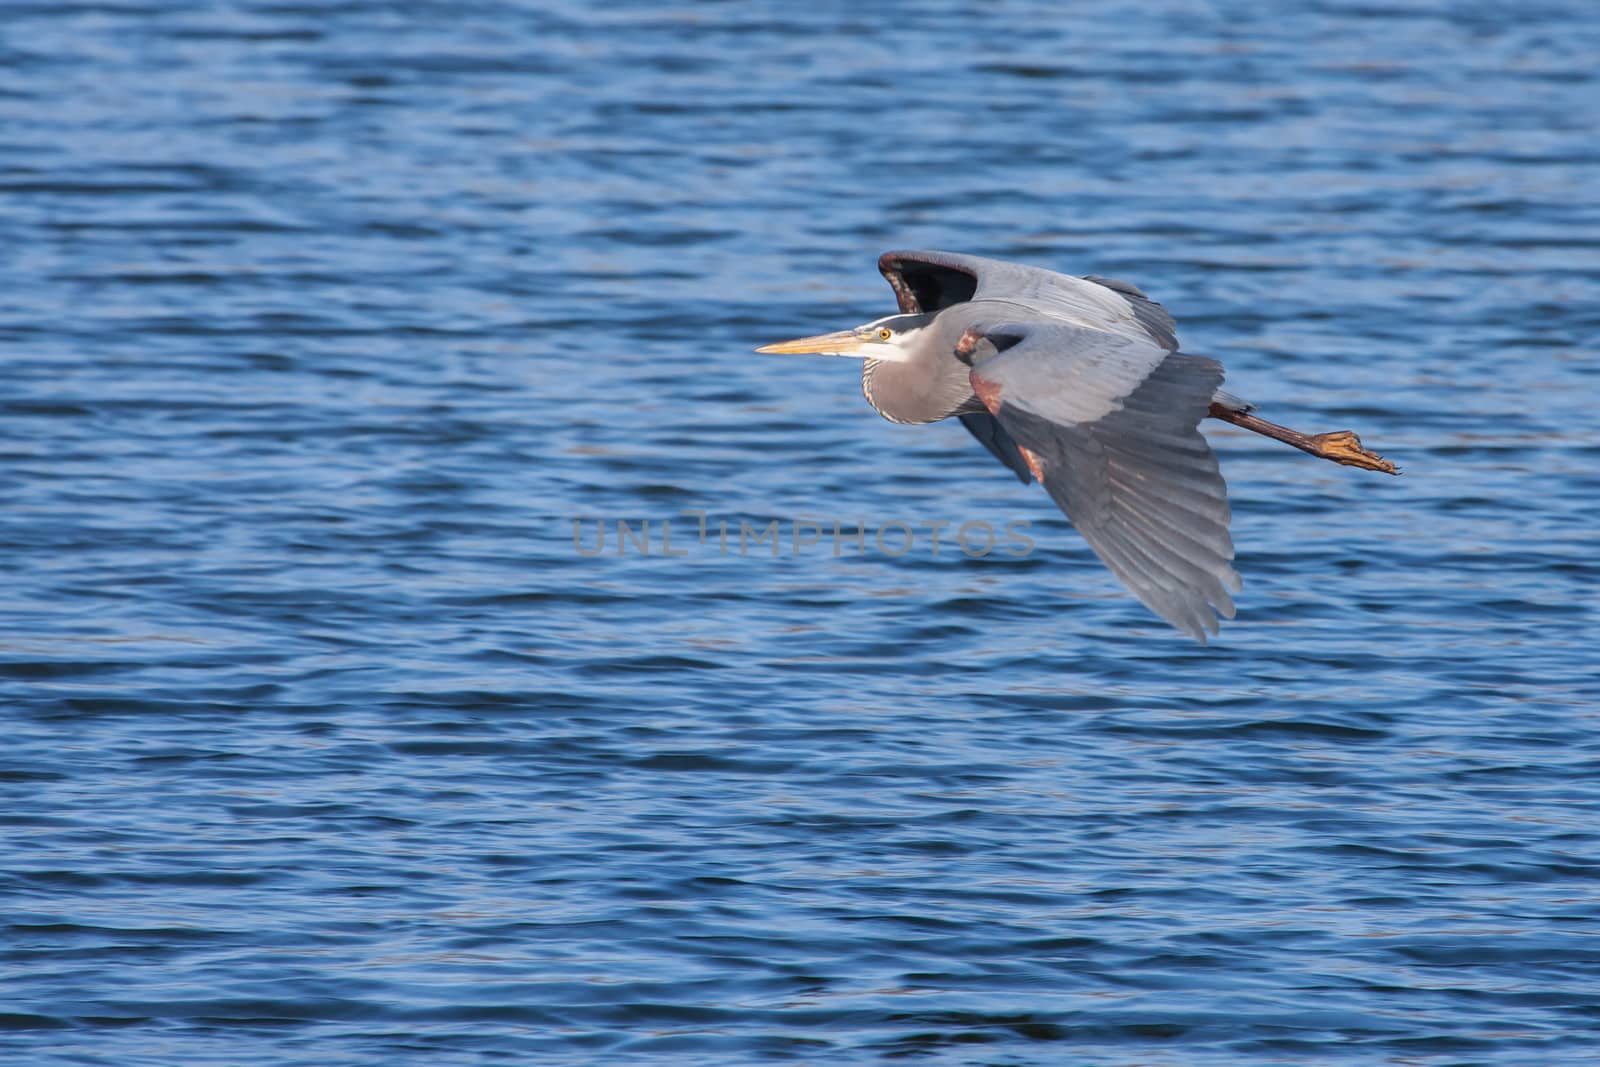 Great Blue Heron in Flight over a lake